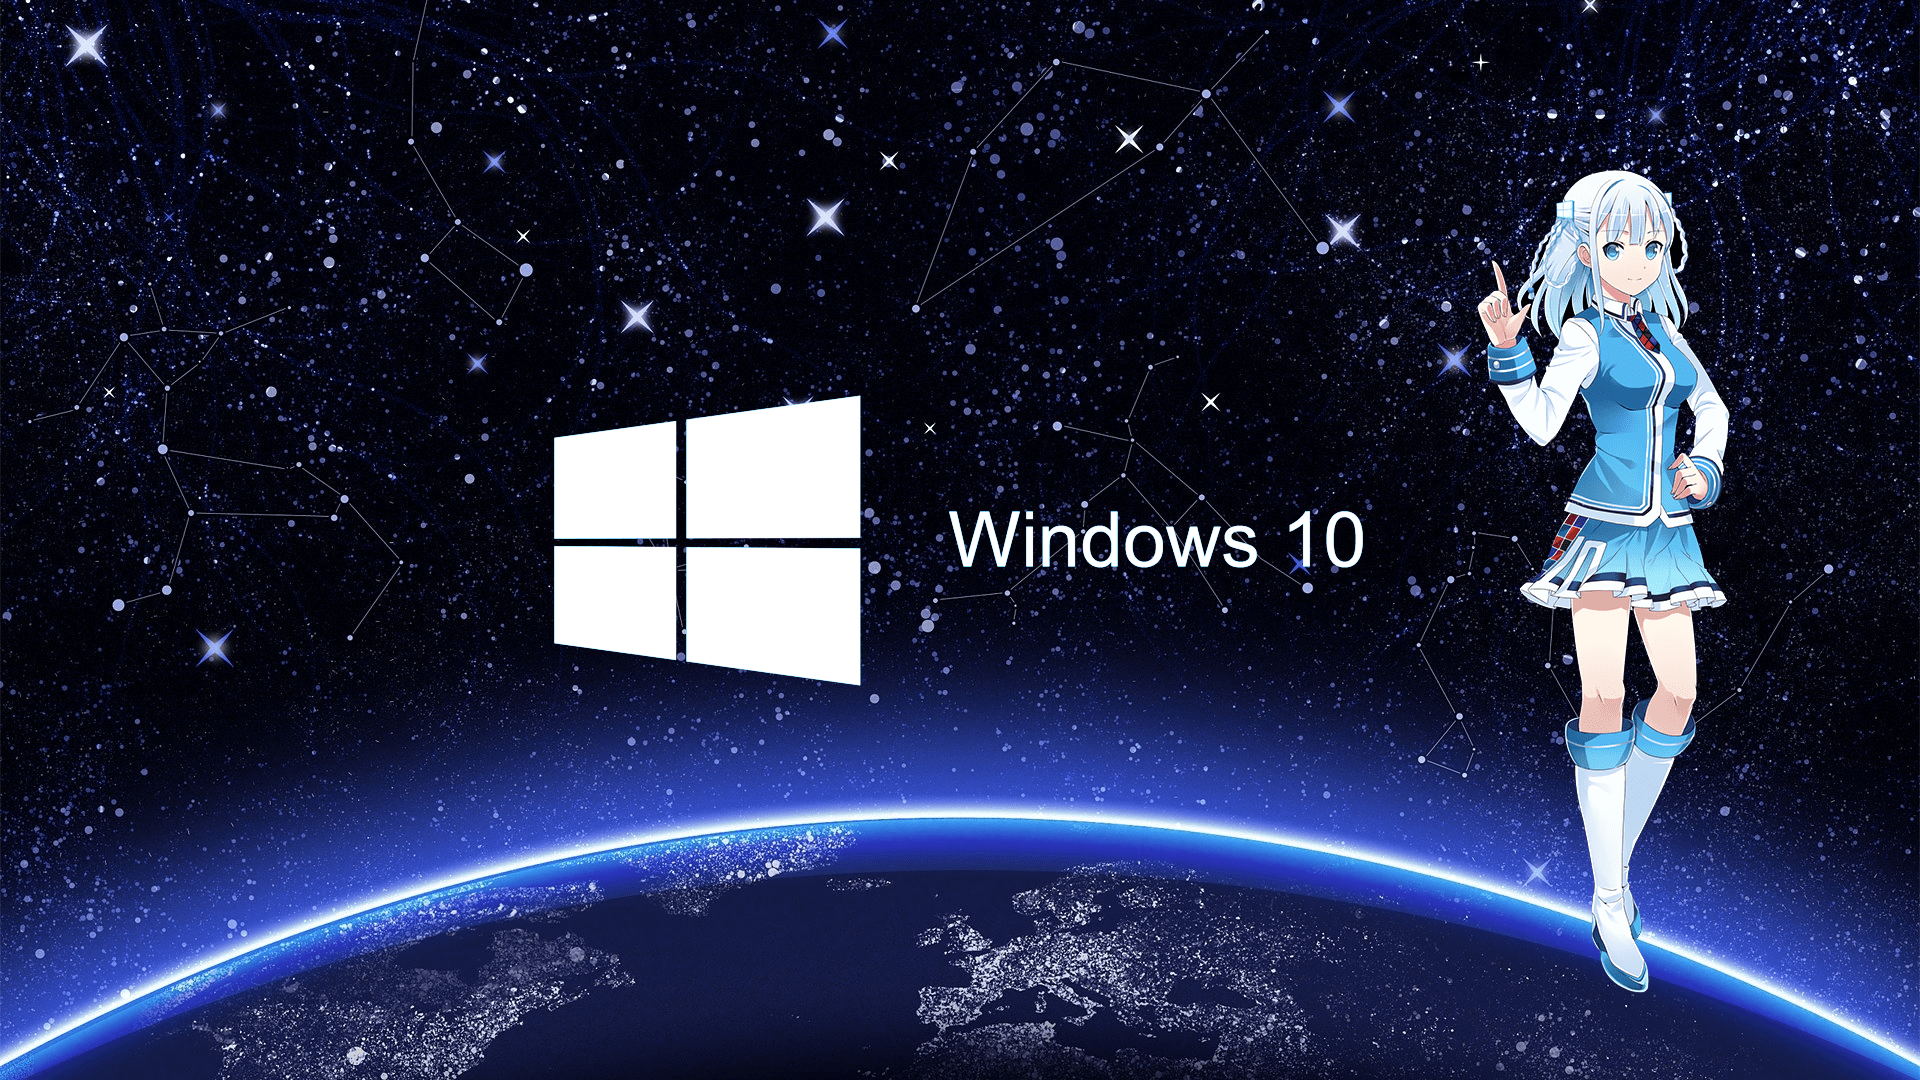 15 Best Animated Wallpapers for Windows 10